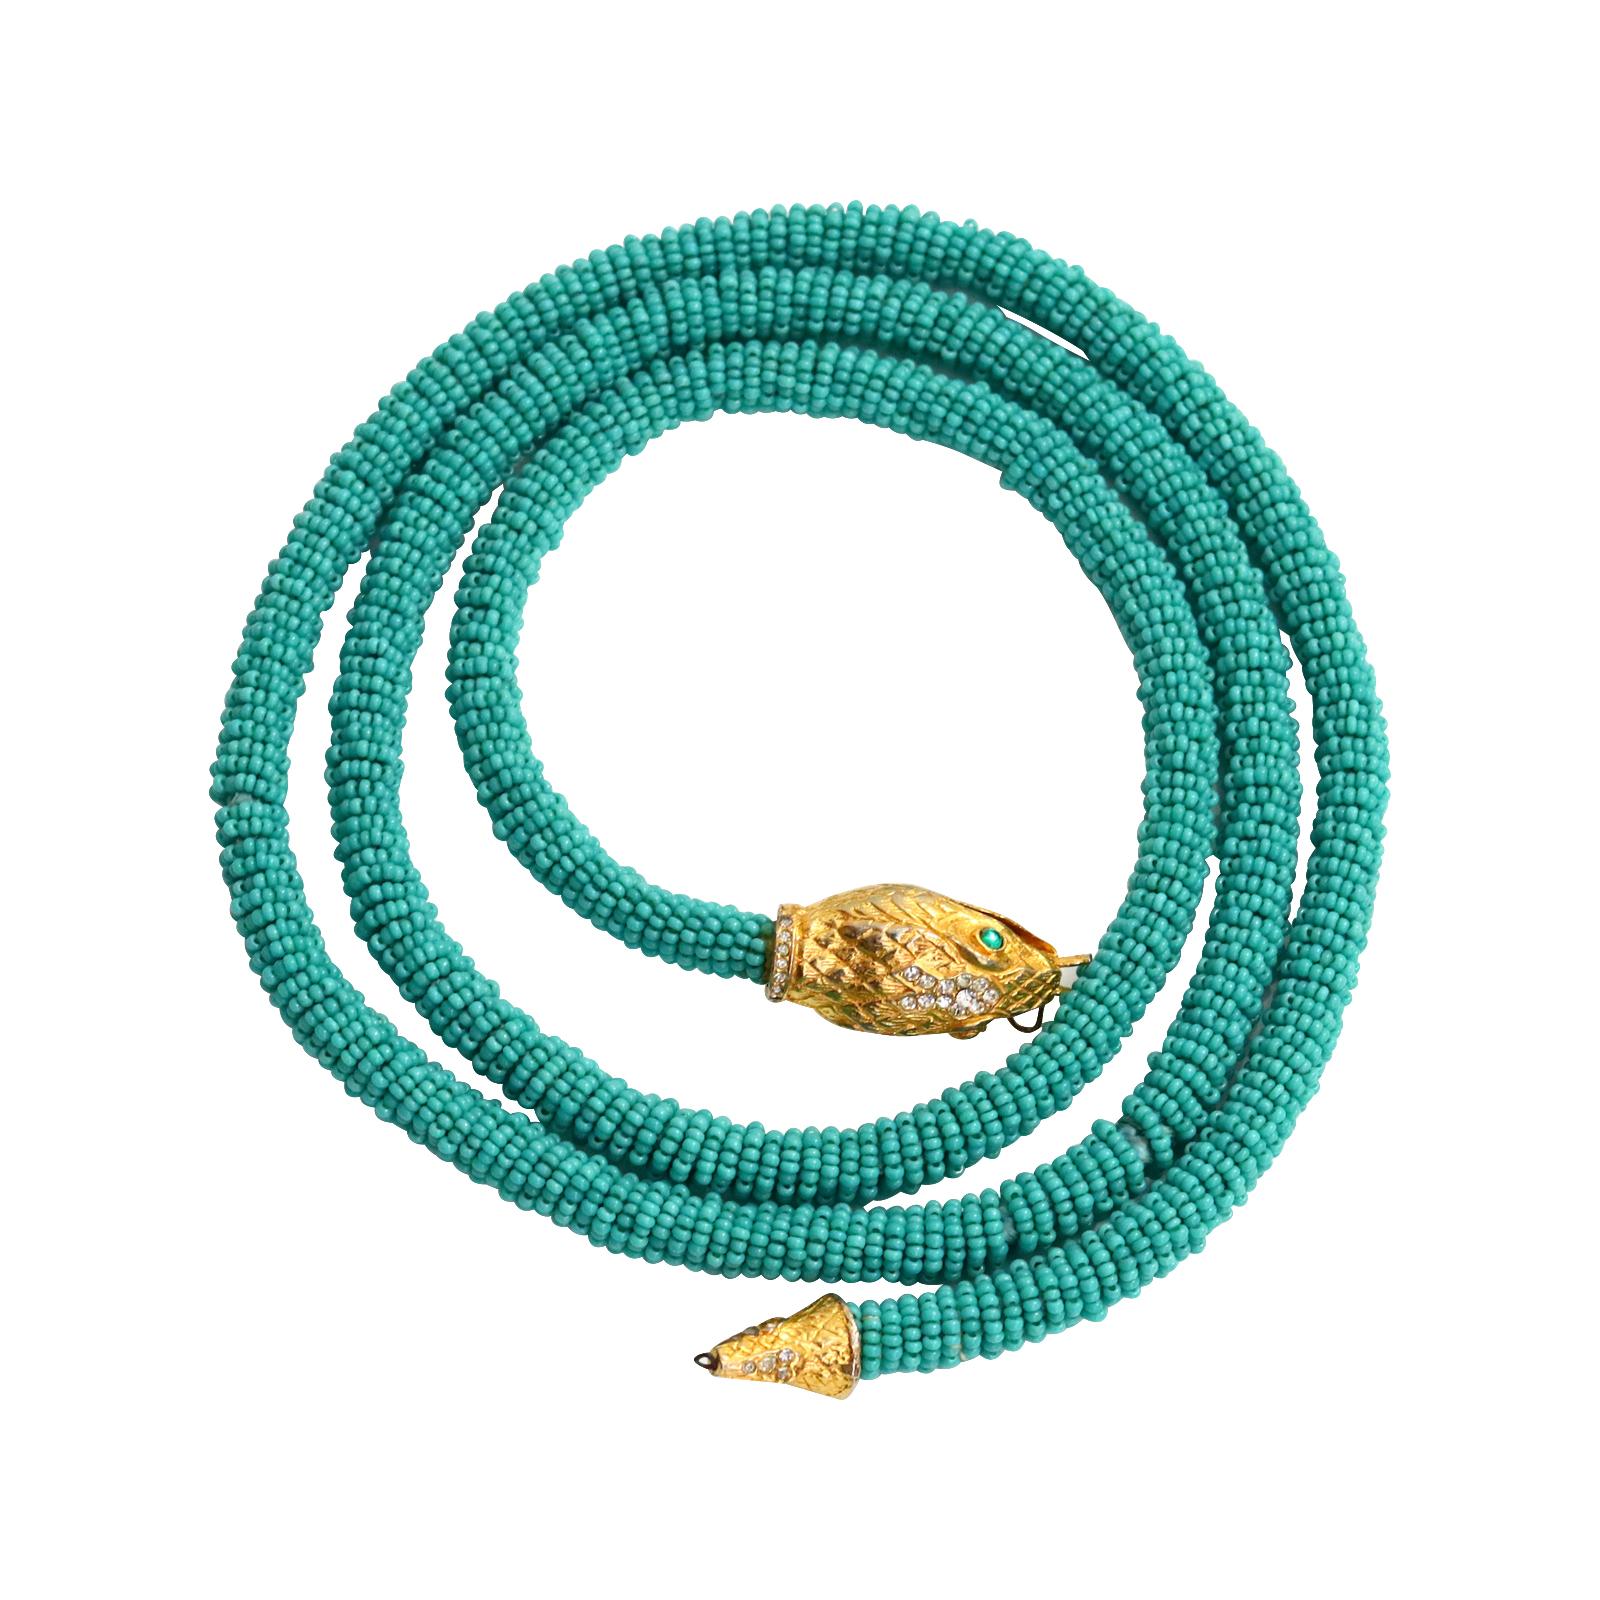 Vintage KJL Turquoise Color Beaded Snake Wrap Necklace, circa 1960s For Sale 1